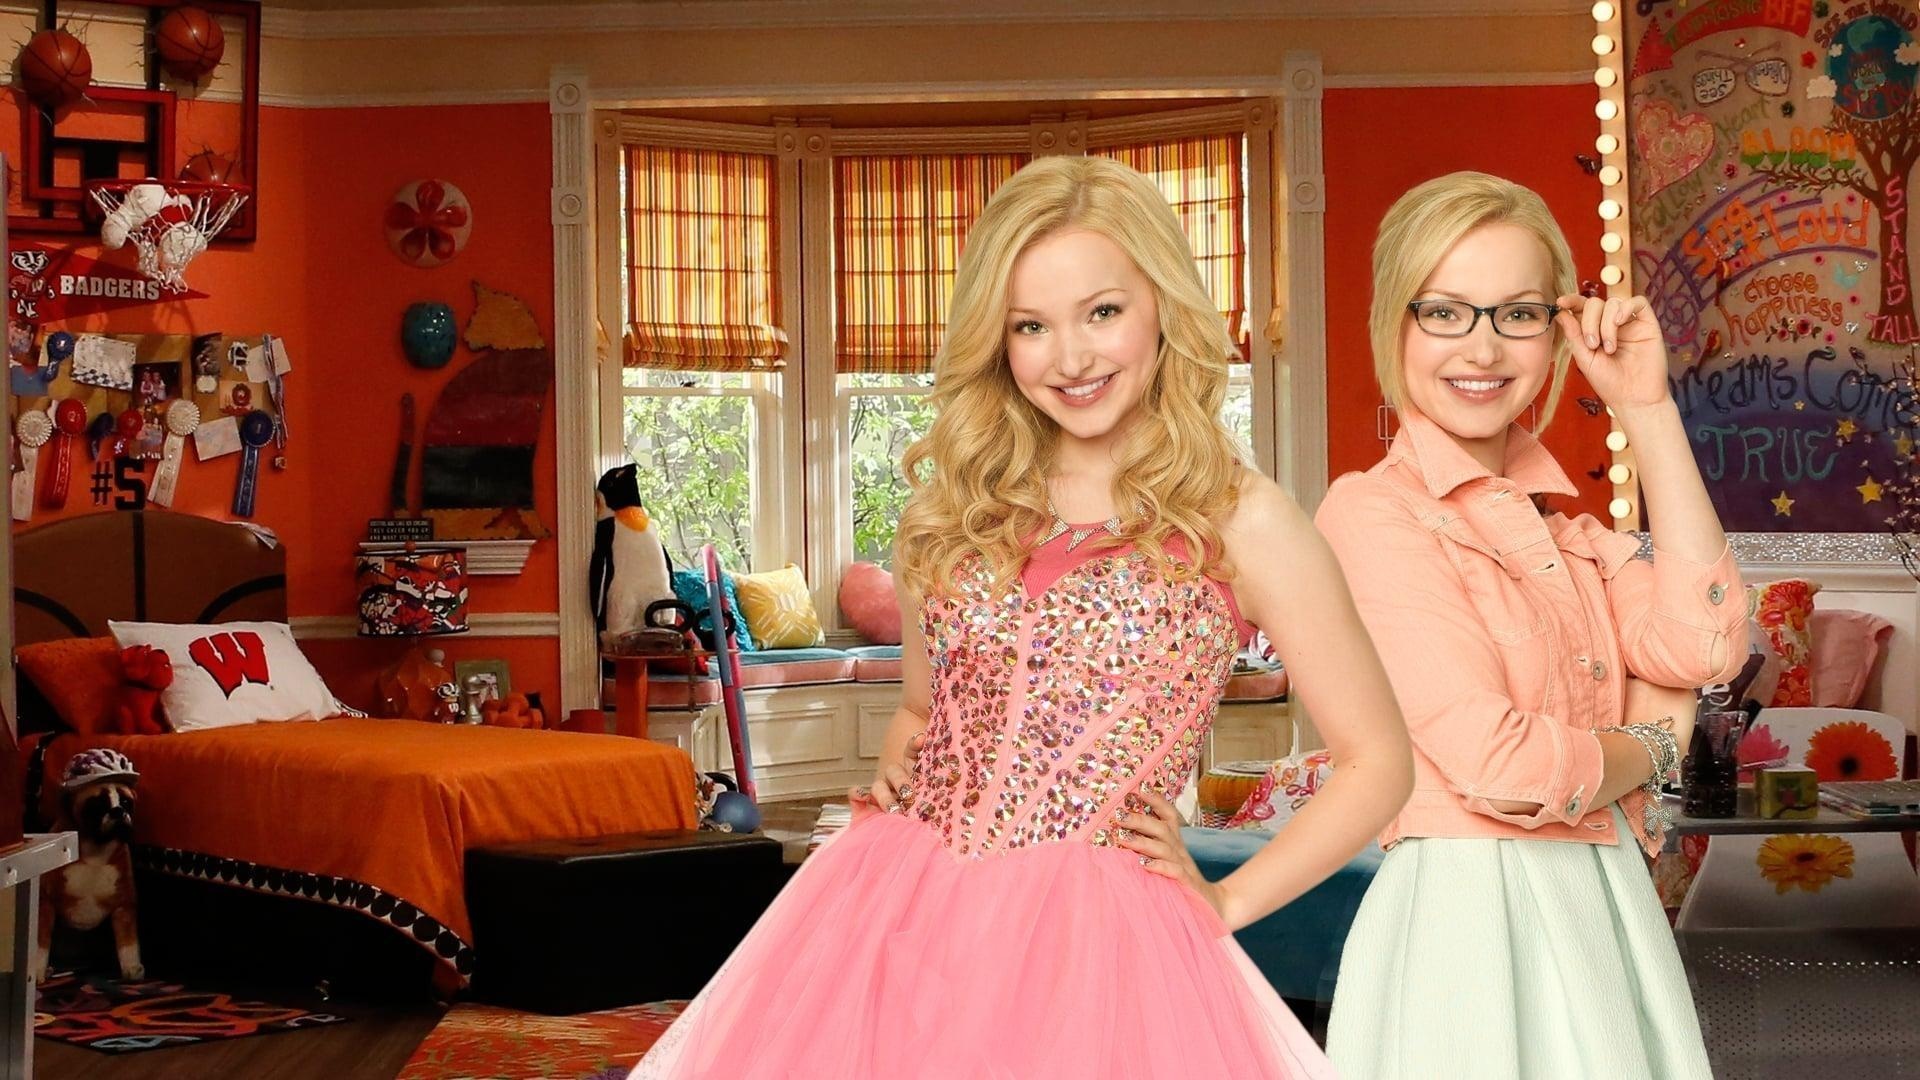 Liv and Maddie, Cali style, Sisters' adventures, TV show, 1920x1080 Full HD Desktop